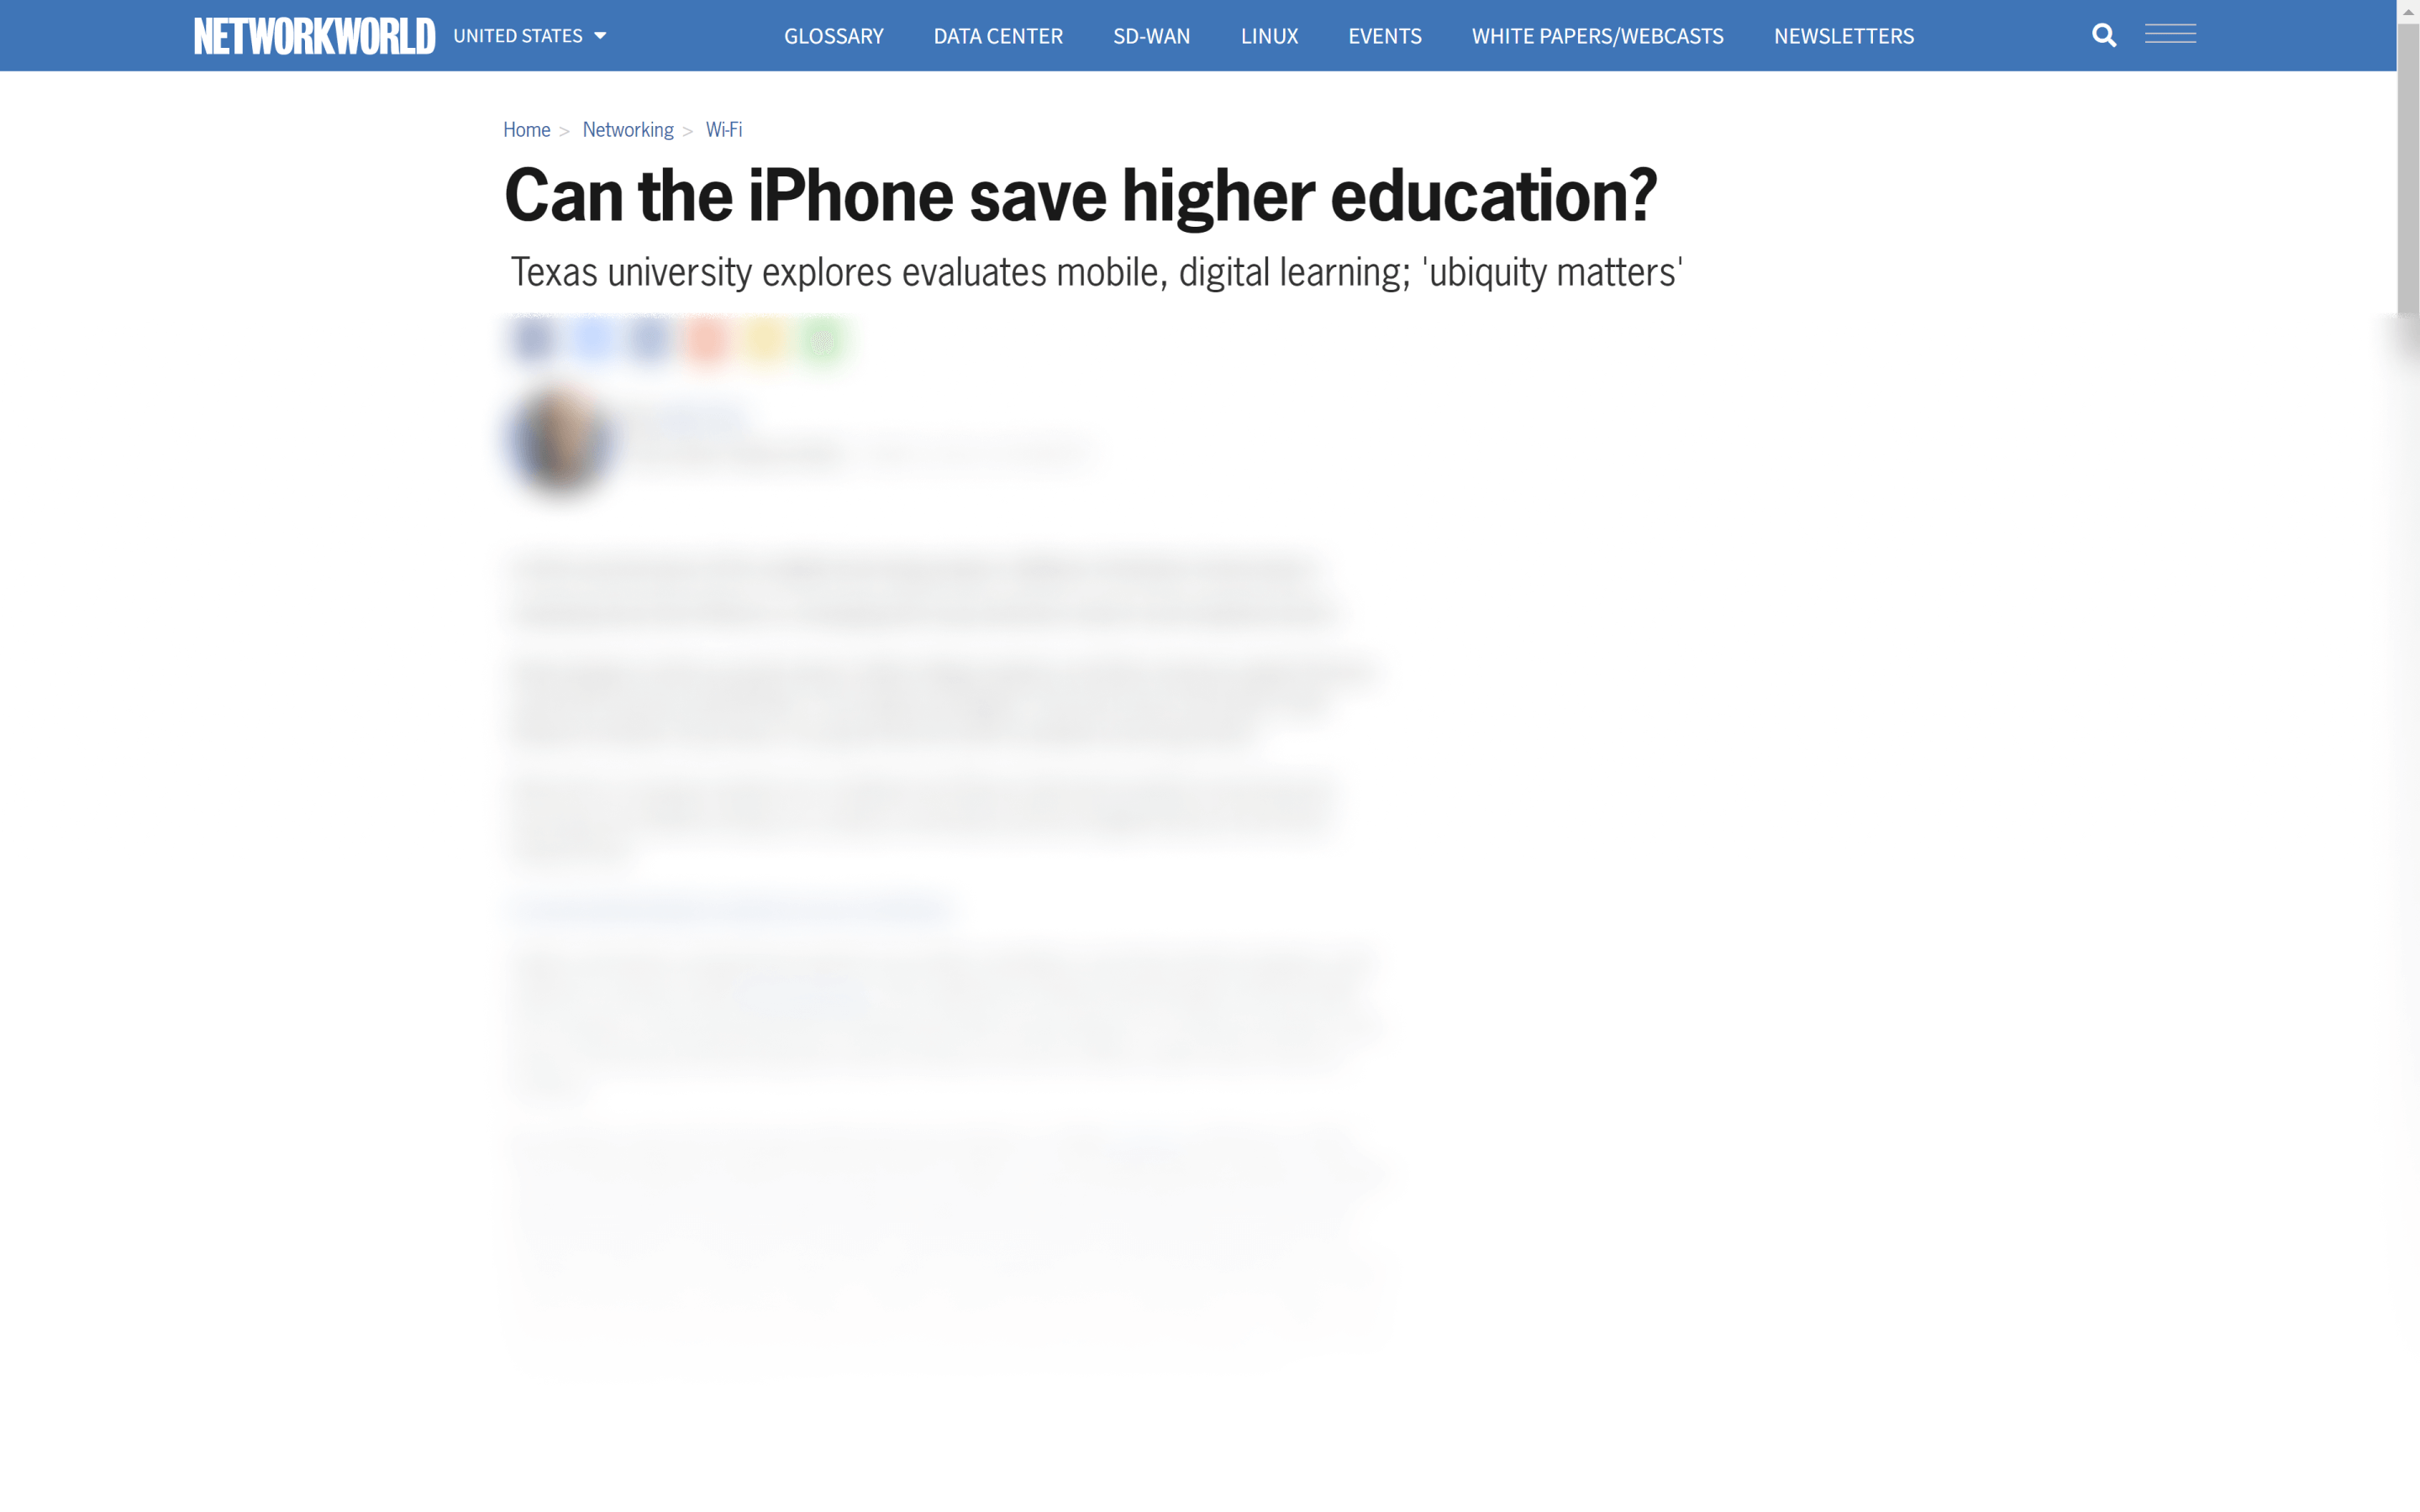 Can the iphone save higher education?